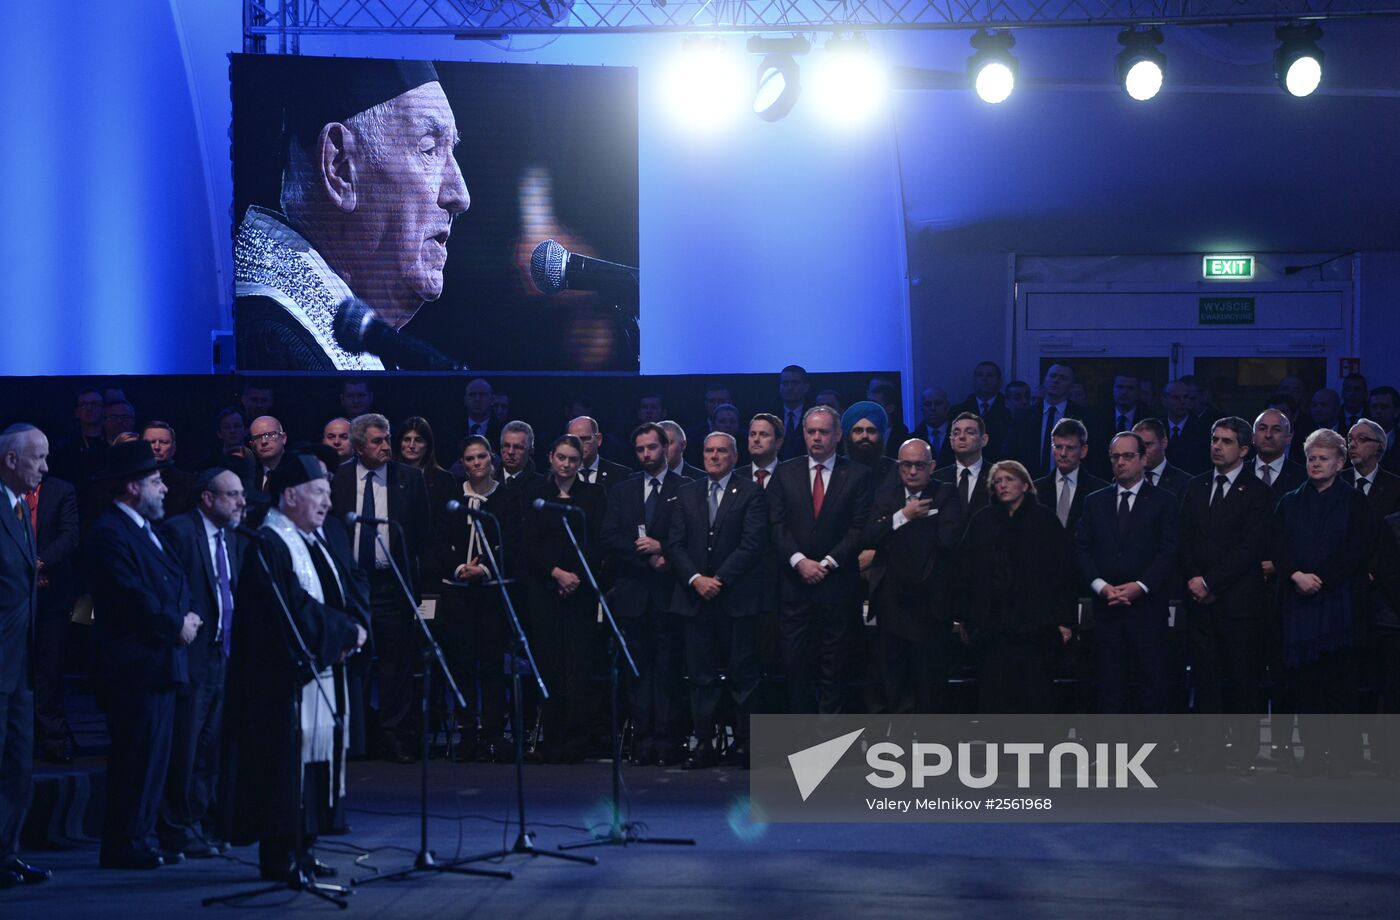 70th anniversary of liberation of Auschwitz-Birkenau concentration camp